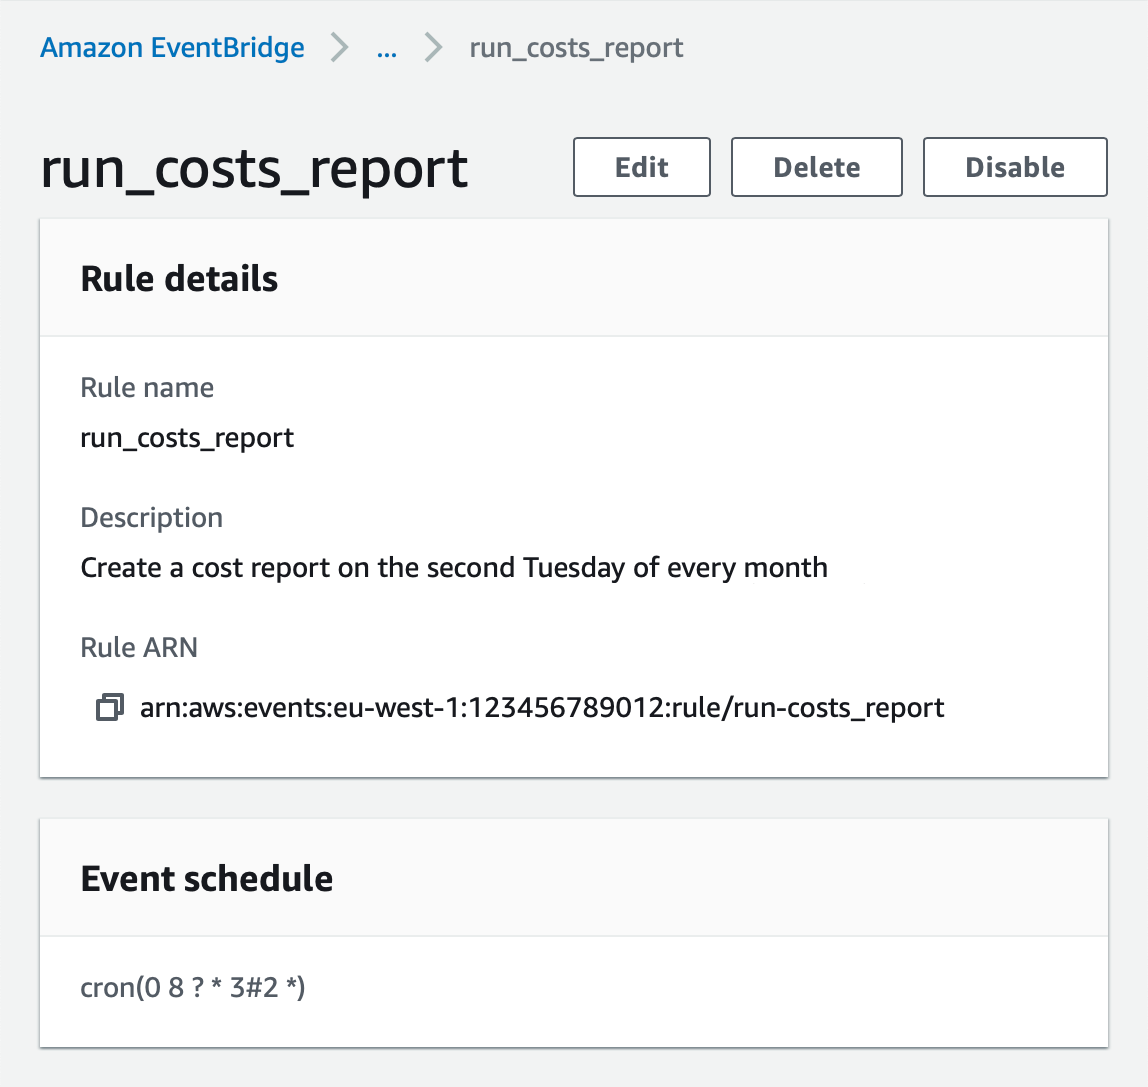 A rule in the EventBridge console. It's titled 'run_costs_report', has a section titled 'Rule details', then a second section titled 'Event schedule' with the expression 'cron(0 8 ? * 3#2 *)'.